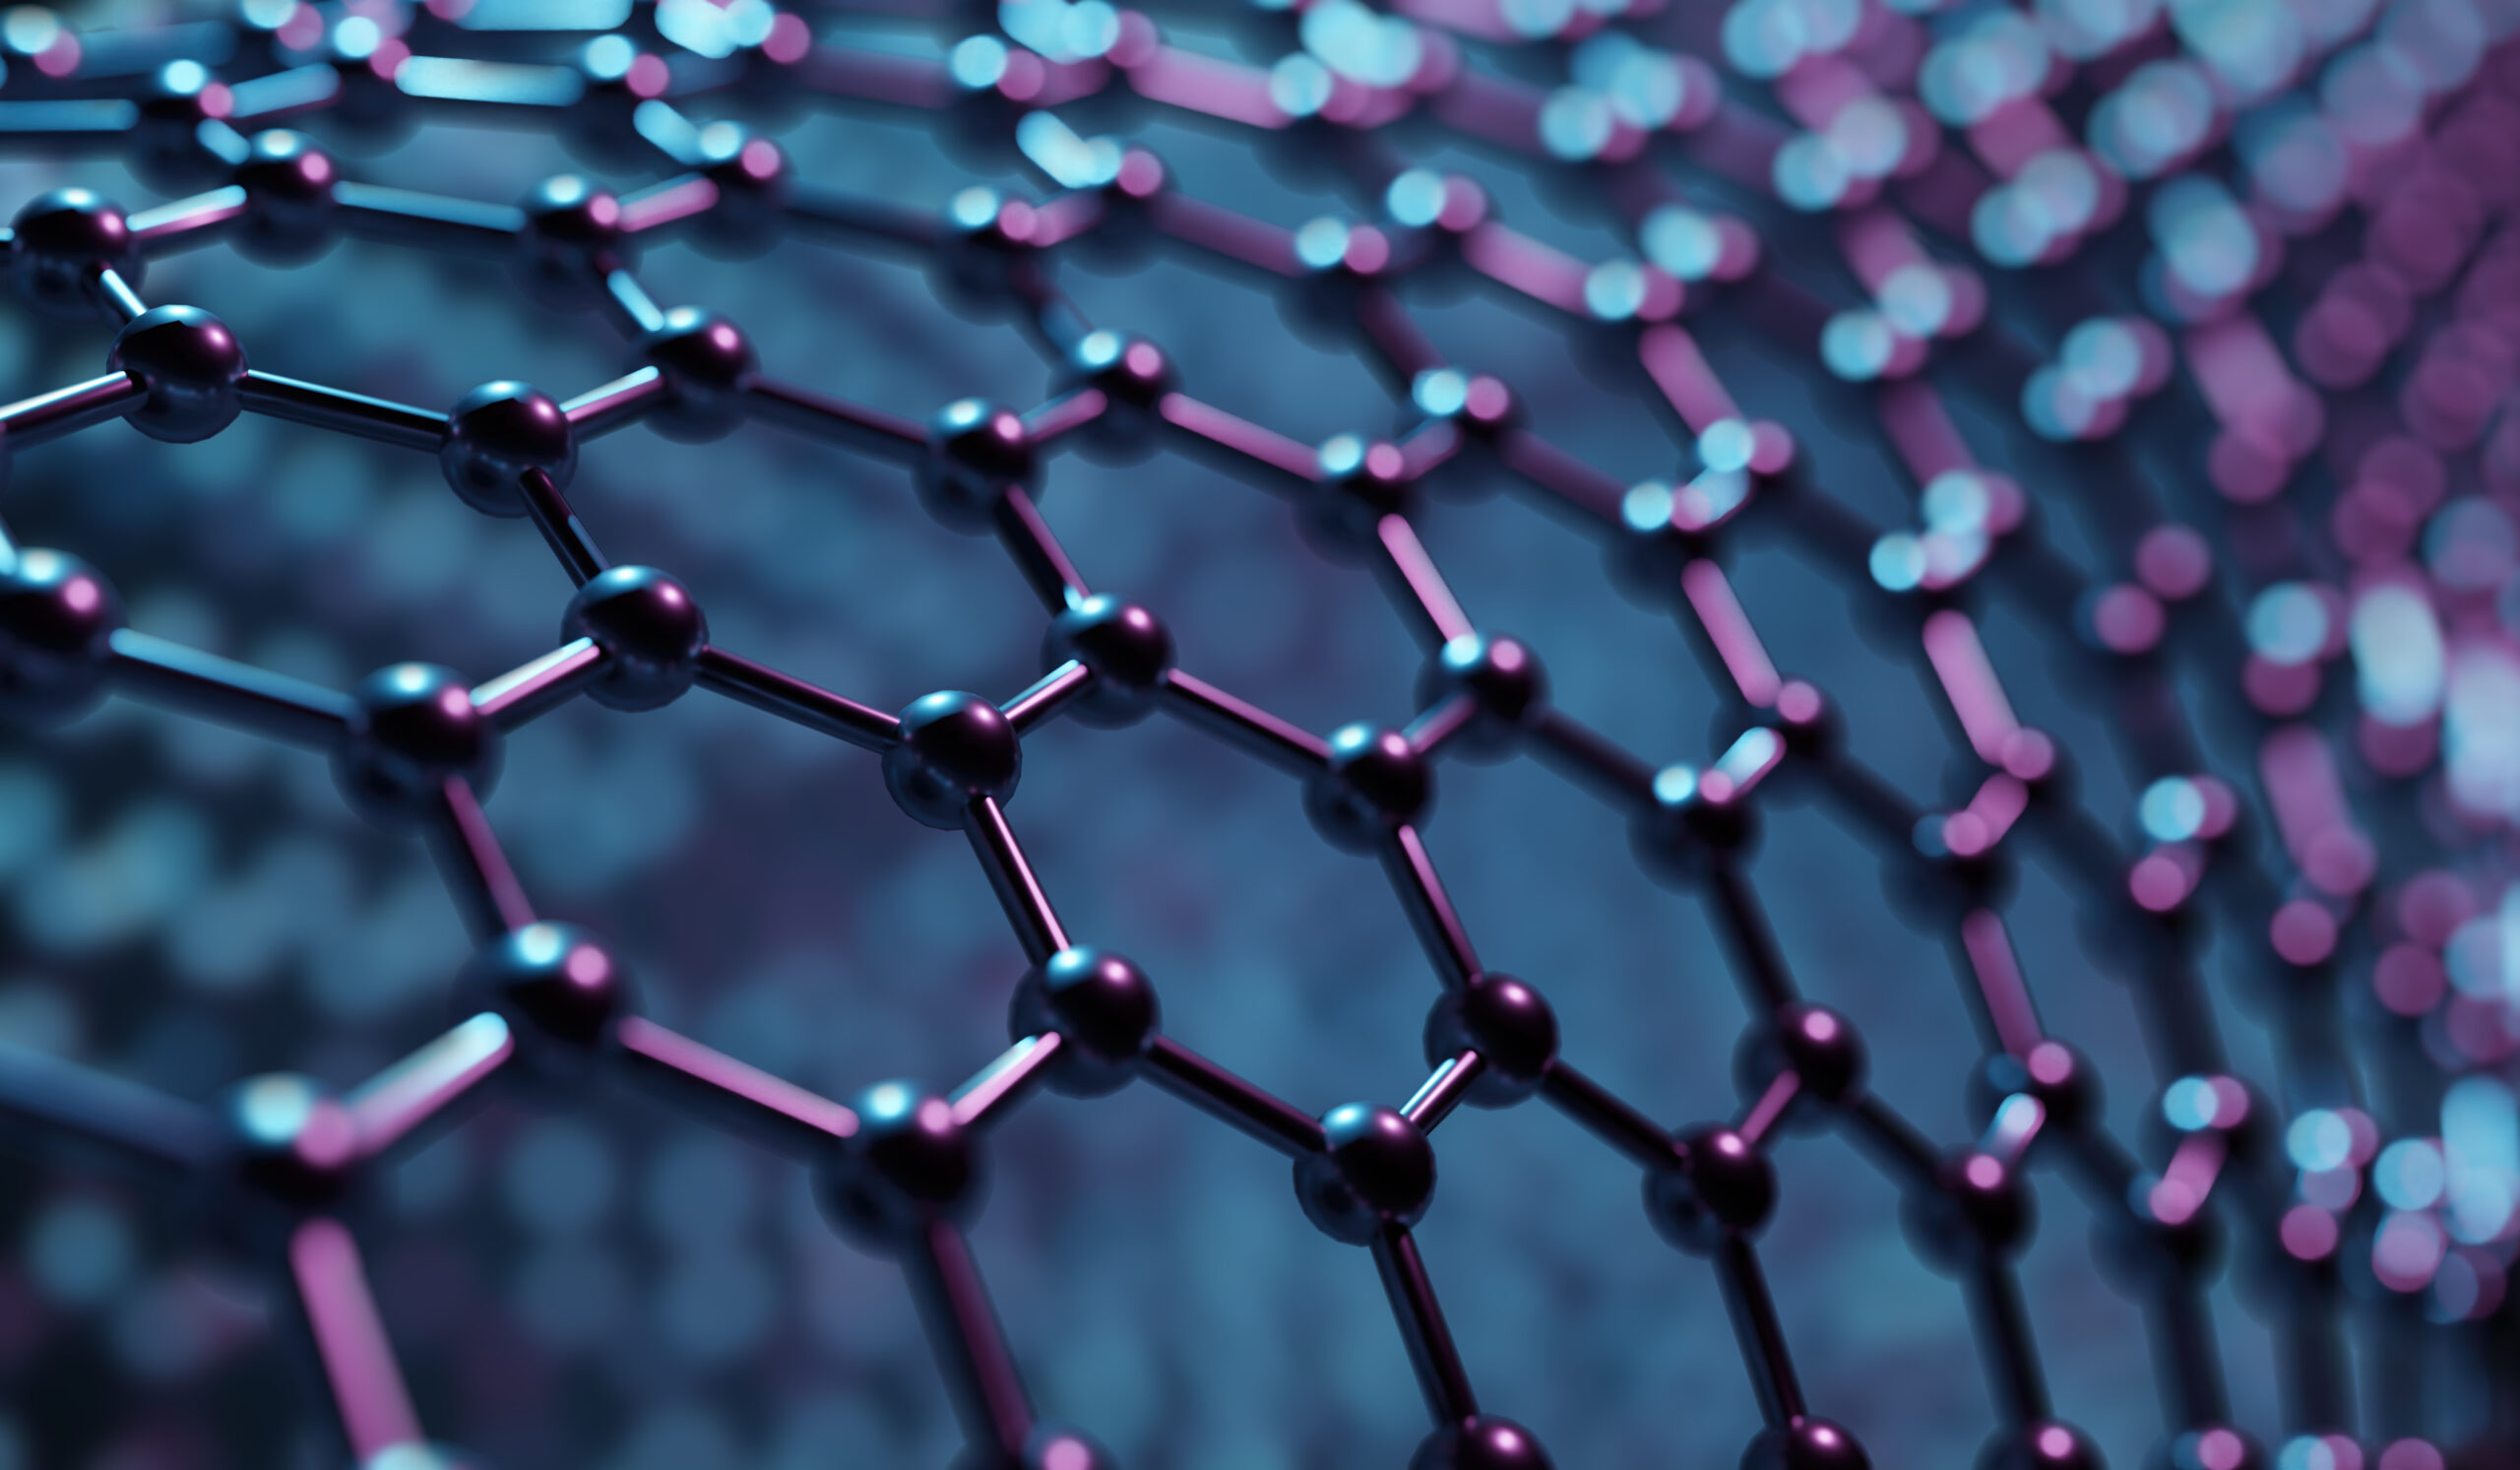 Short Carbon Nanotubes Hold Big Promise for the Future of Healthcare Delivery Platforms